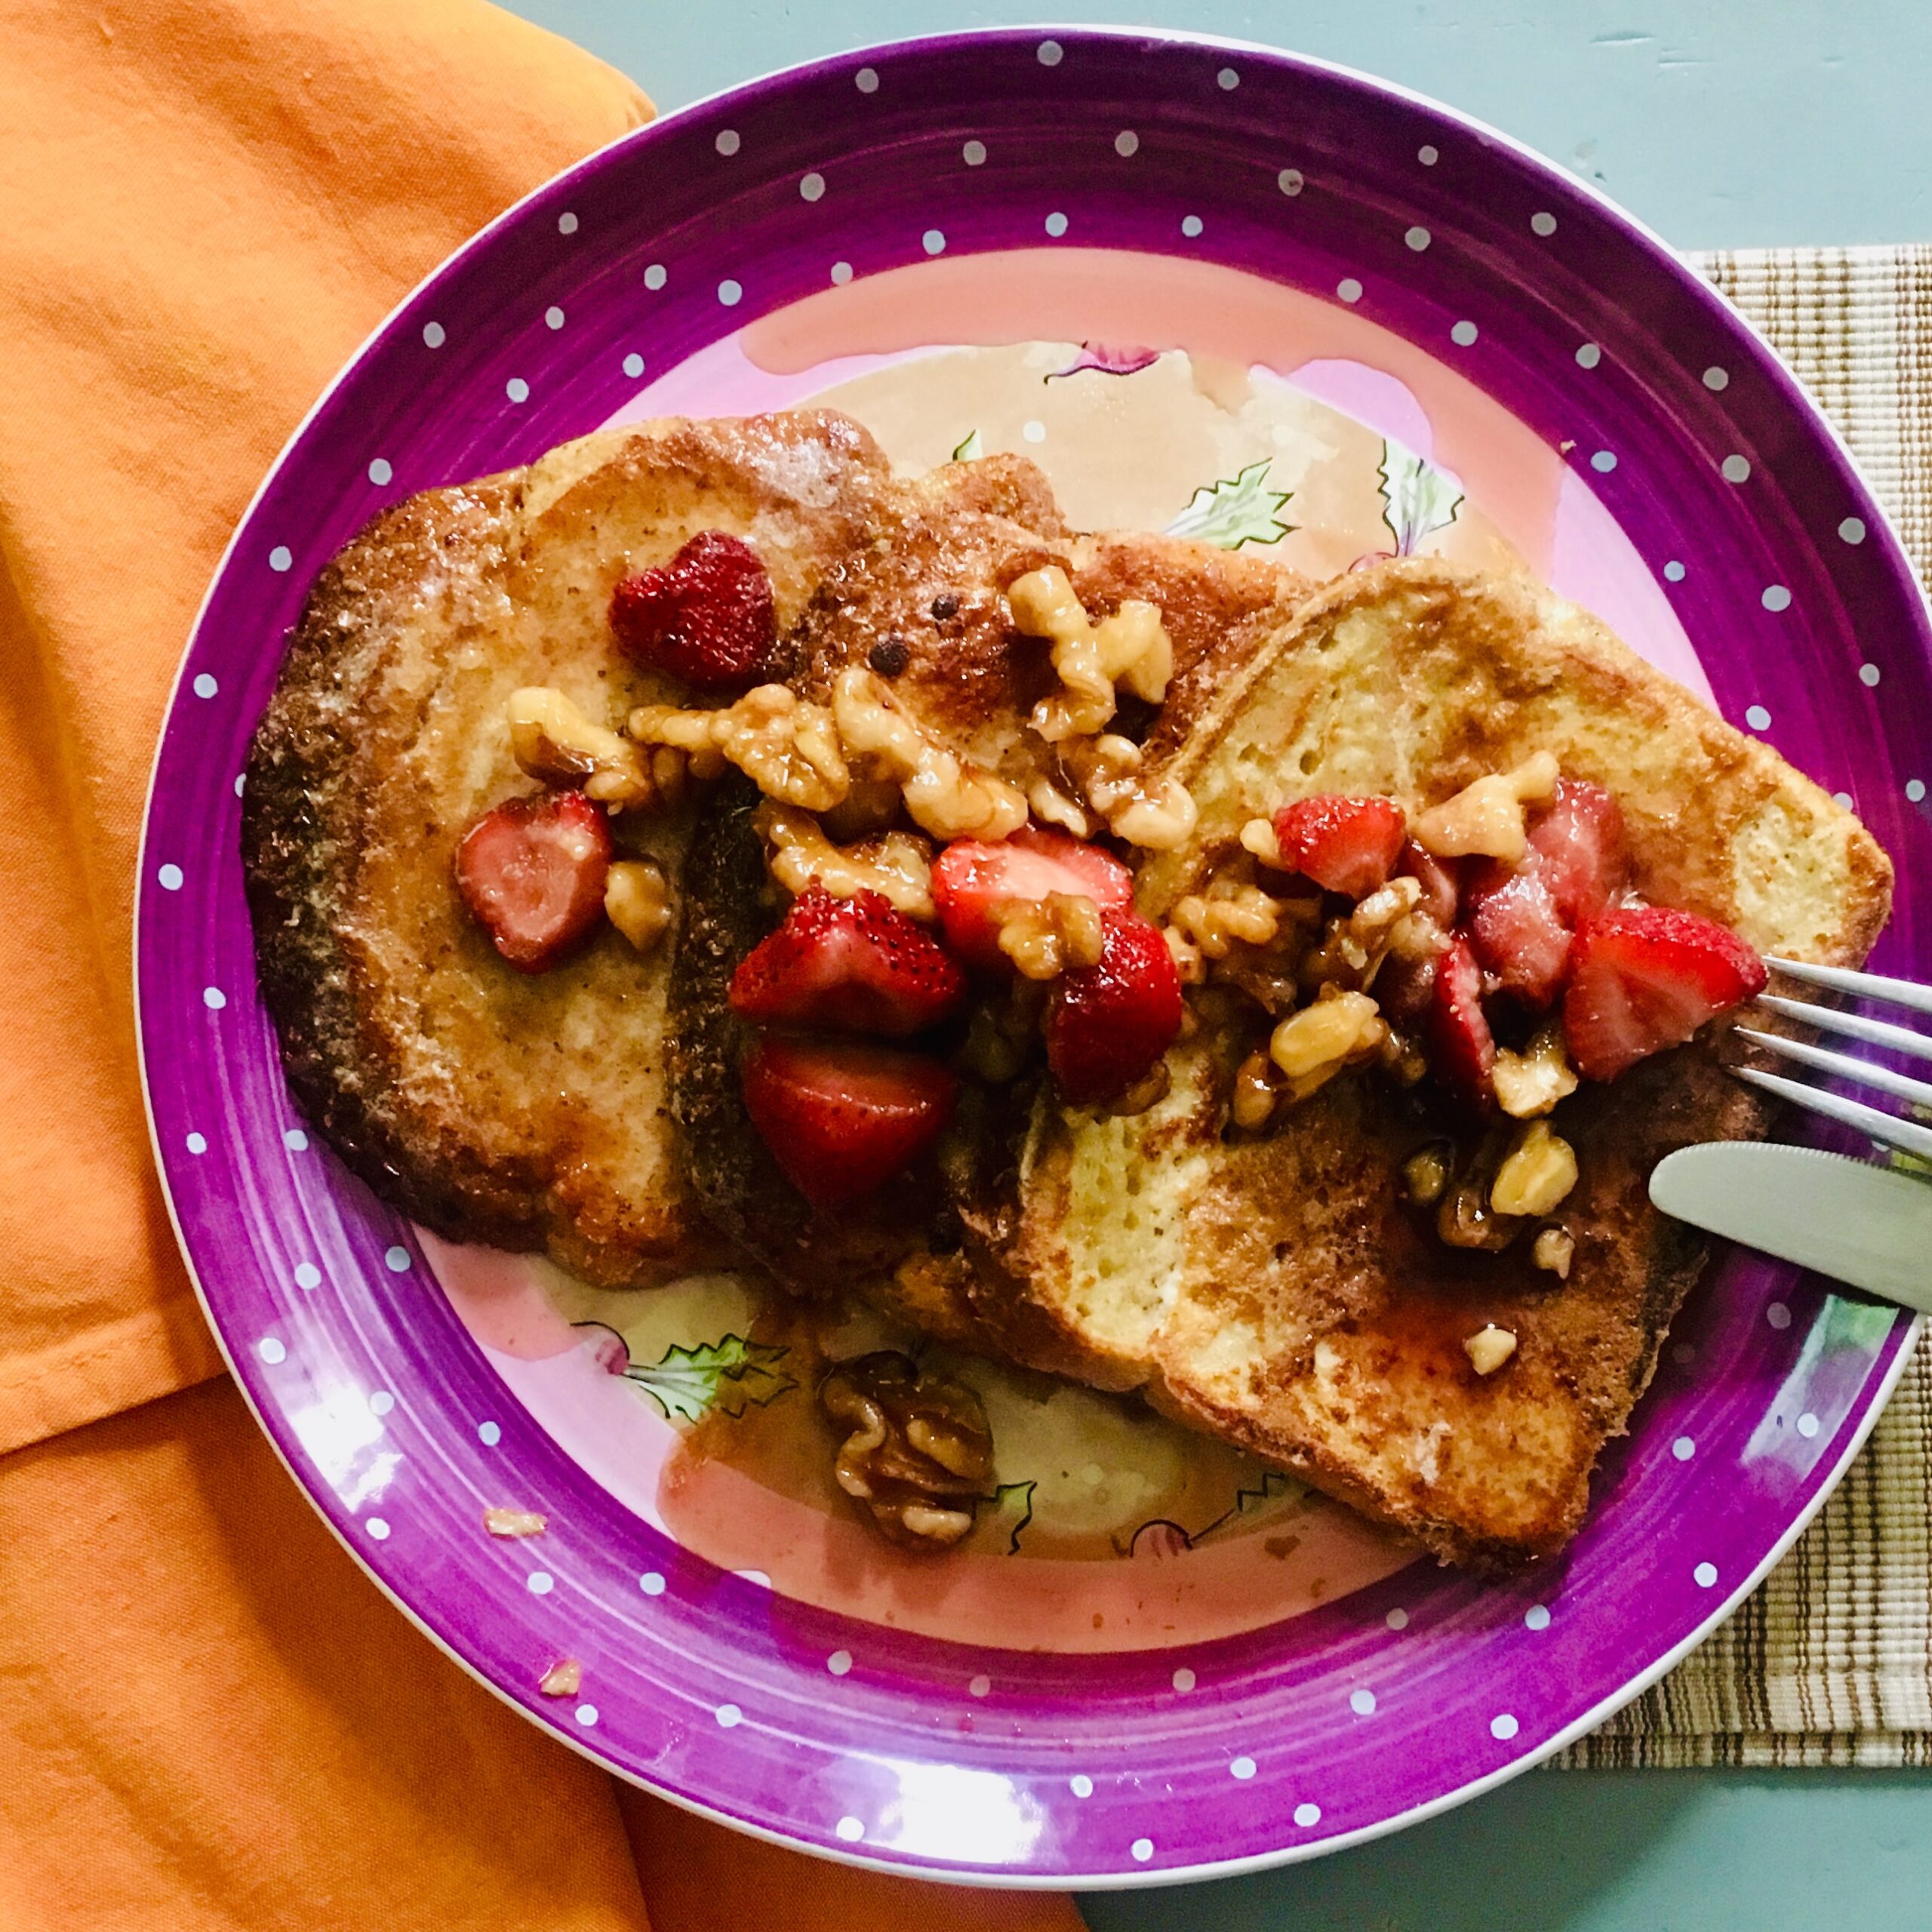 Three slices of French toast with berries and nuts atop a purple-rimmed plate and orange napkin